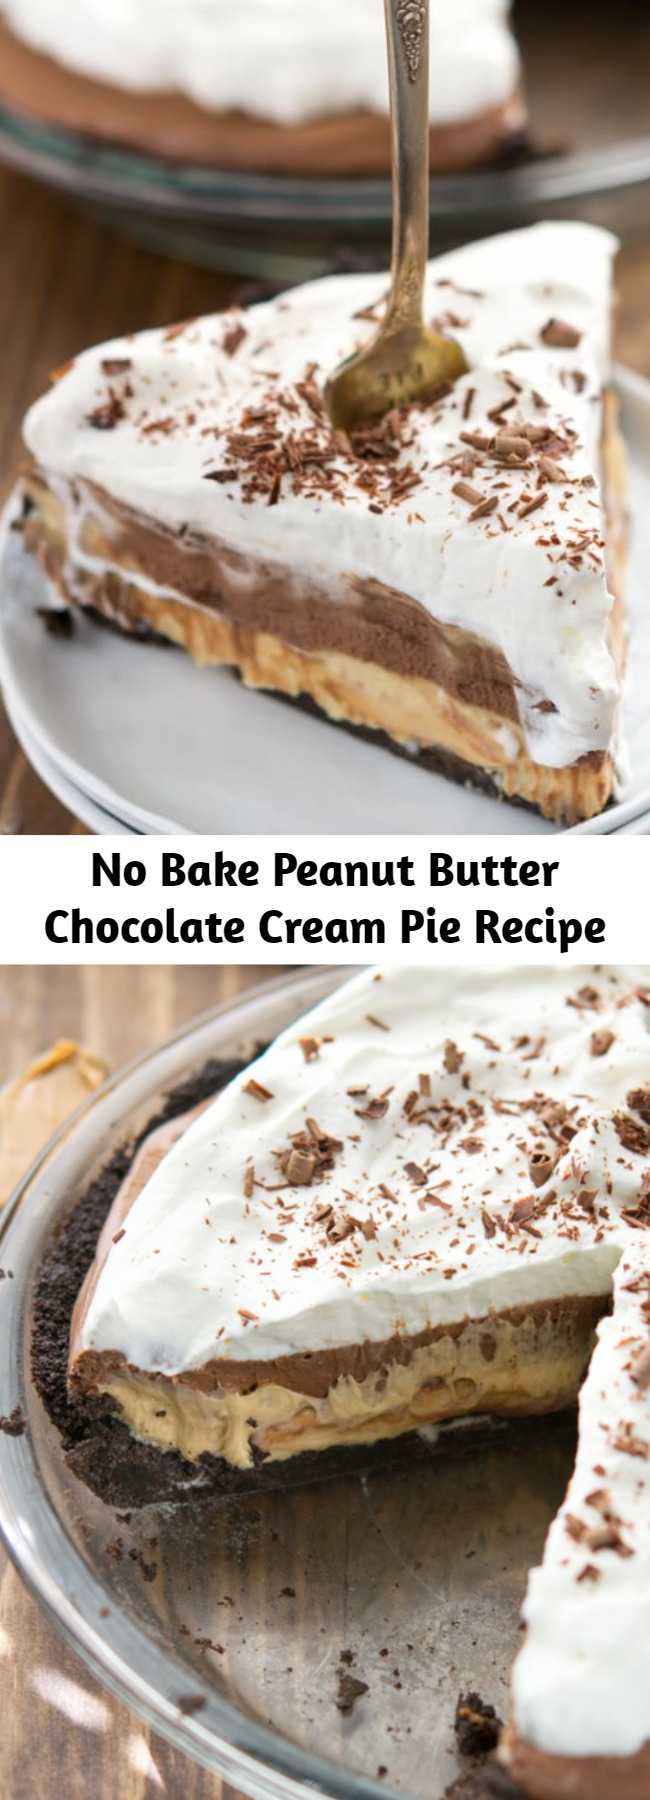 No Bake Peanut Butter Chocolate Cream Pie Recipe - Layers of Oreo crust, peanut butter, and chocolate cream pair perfectly for the best pie I've ever eaten! The best part is it's totally no bake and egg-free! I just can’t even express how good it was. Words like decadent, amazing, creamy, and delicious just don’t seem to suffice. Because it was better than all of those words.